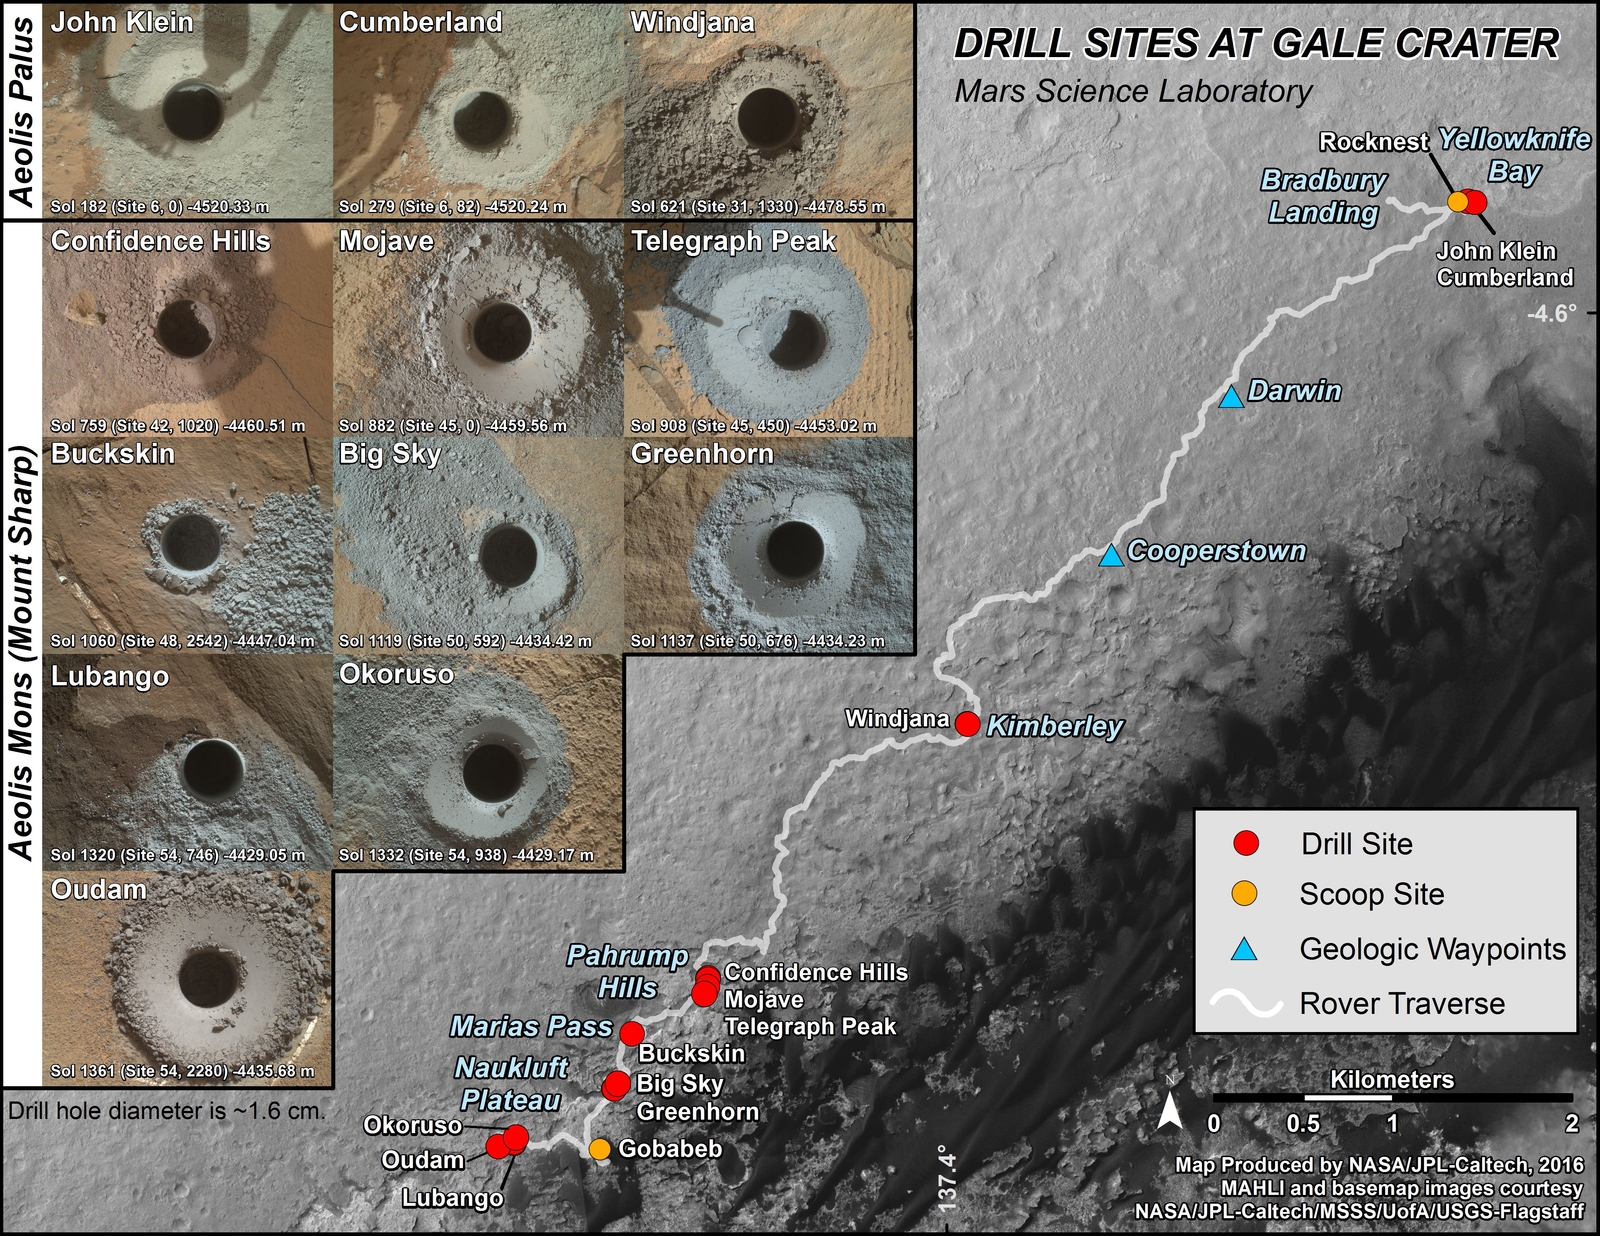 This graphic maps the first 14 sites where NASA's Curiosity Mars rover collected rock or soil samples for analysis using the rover's onboard laboratory. It also presents images of the drilled holes where 12 rock-powder samples were acquired. At the other two sites Curiosity scooped soil samples.